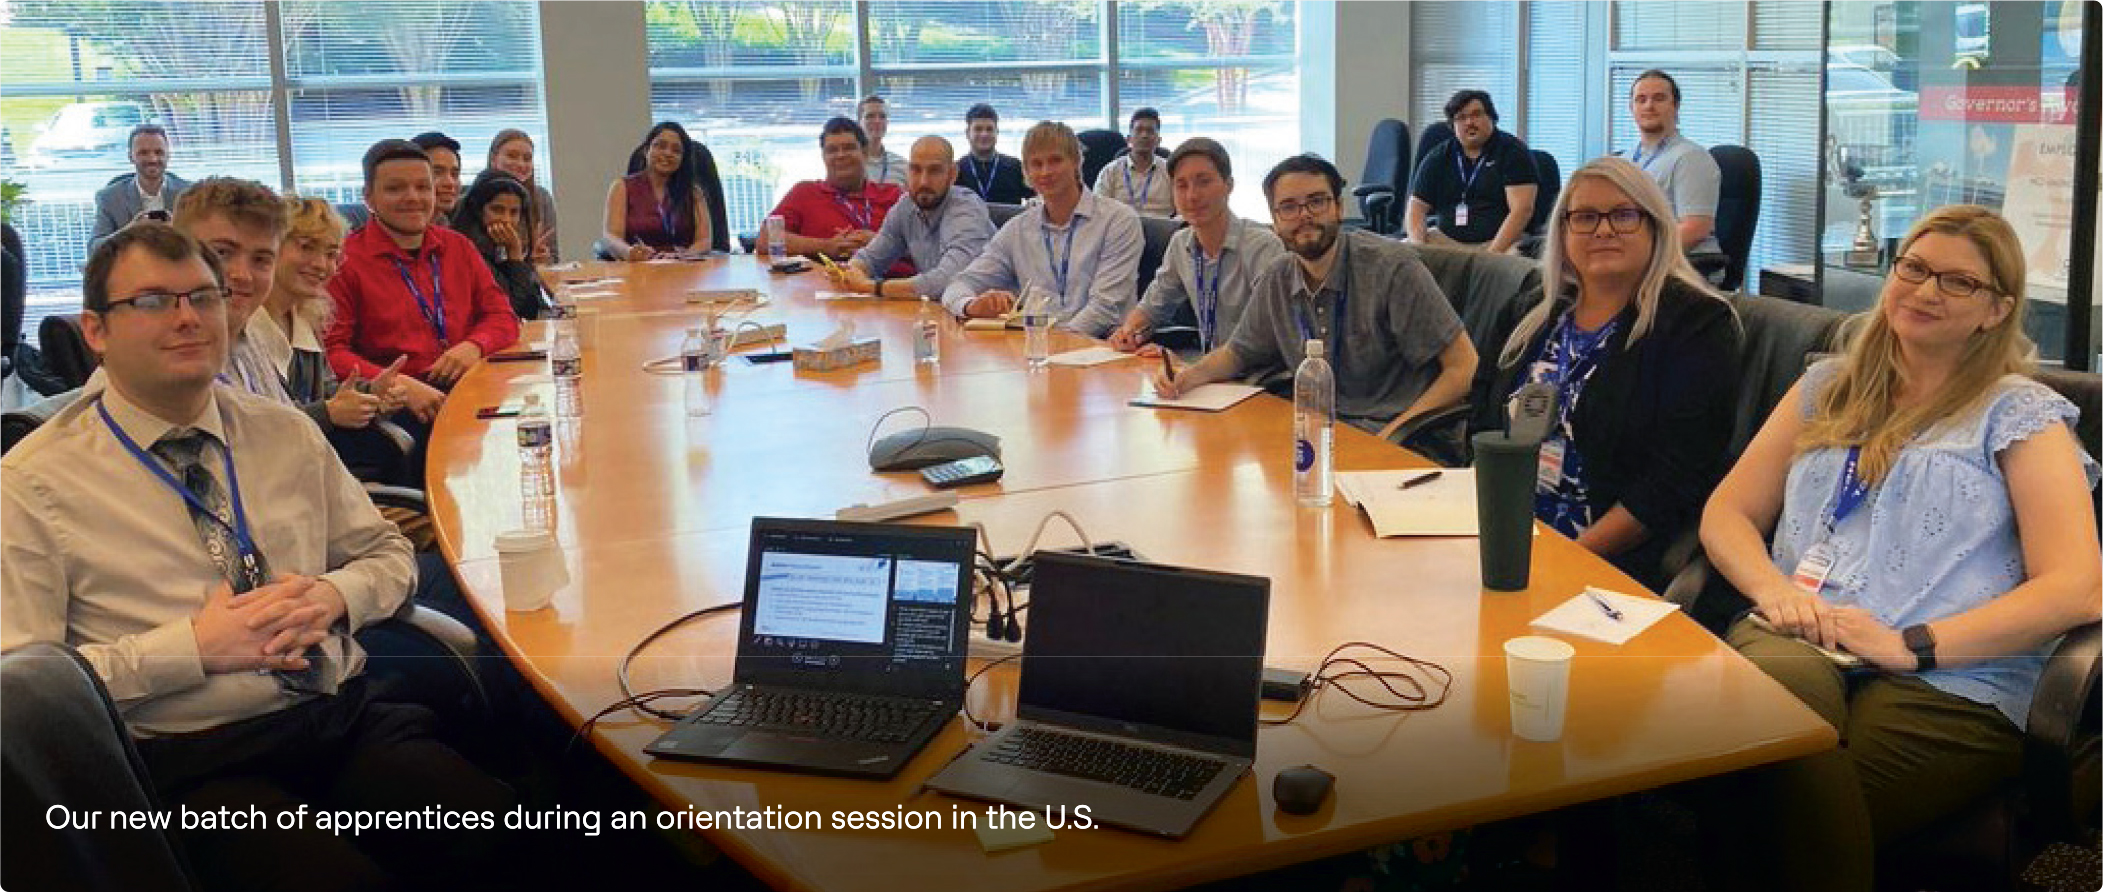 Our new batch of apprentices during an orientation session in the U.S.